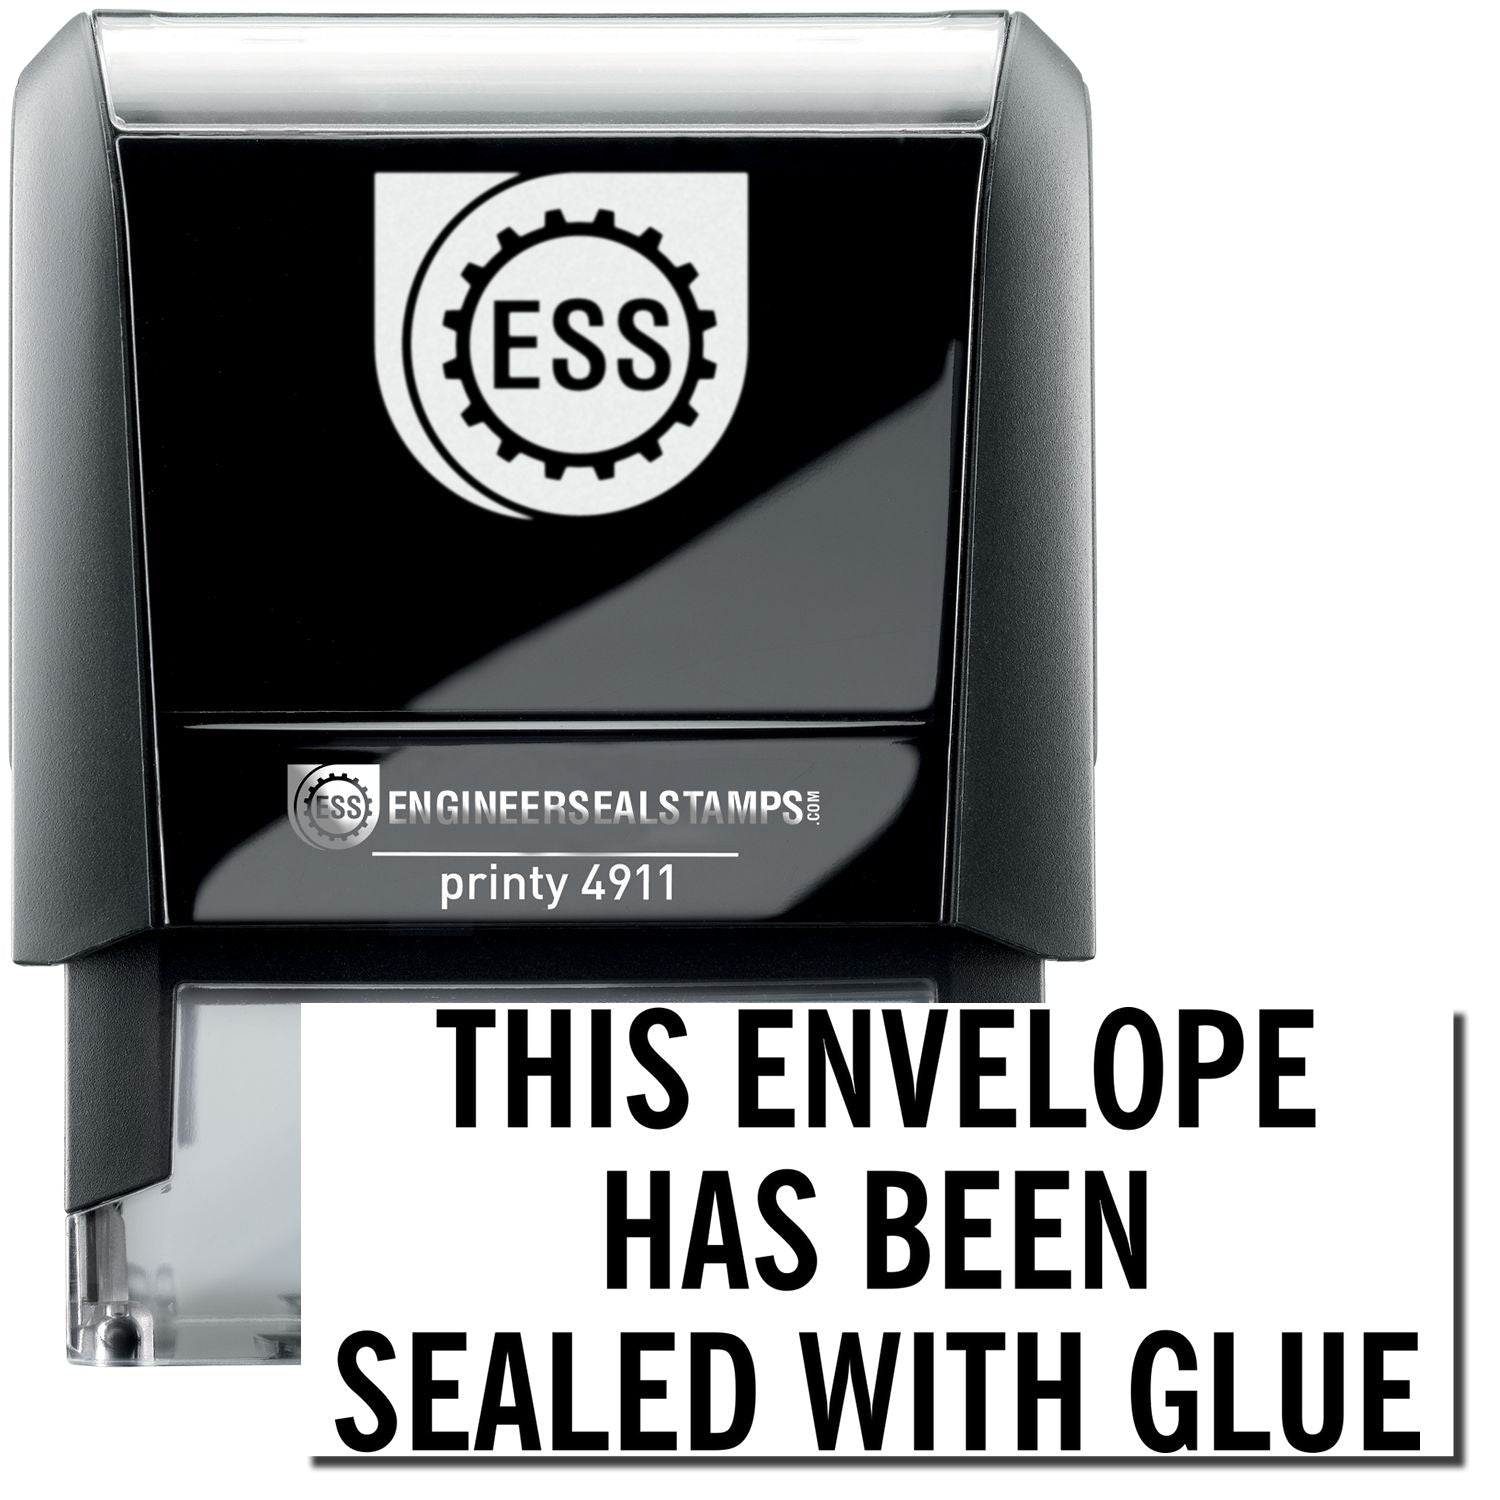 A self-inking stamp with a stamped image showing how the text "THIS ENVELOPE HAS BEEN SEALED WITH GLUE" is displayed after stamping.